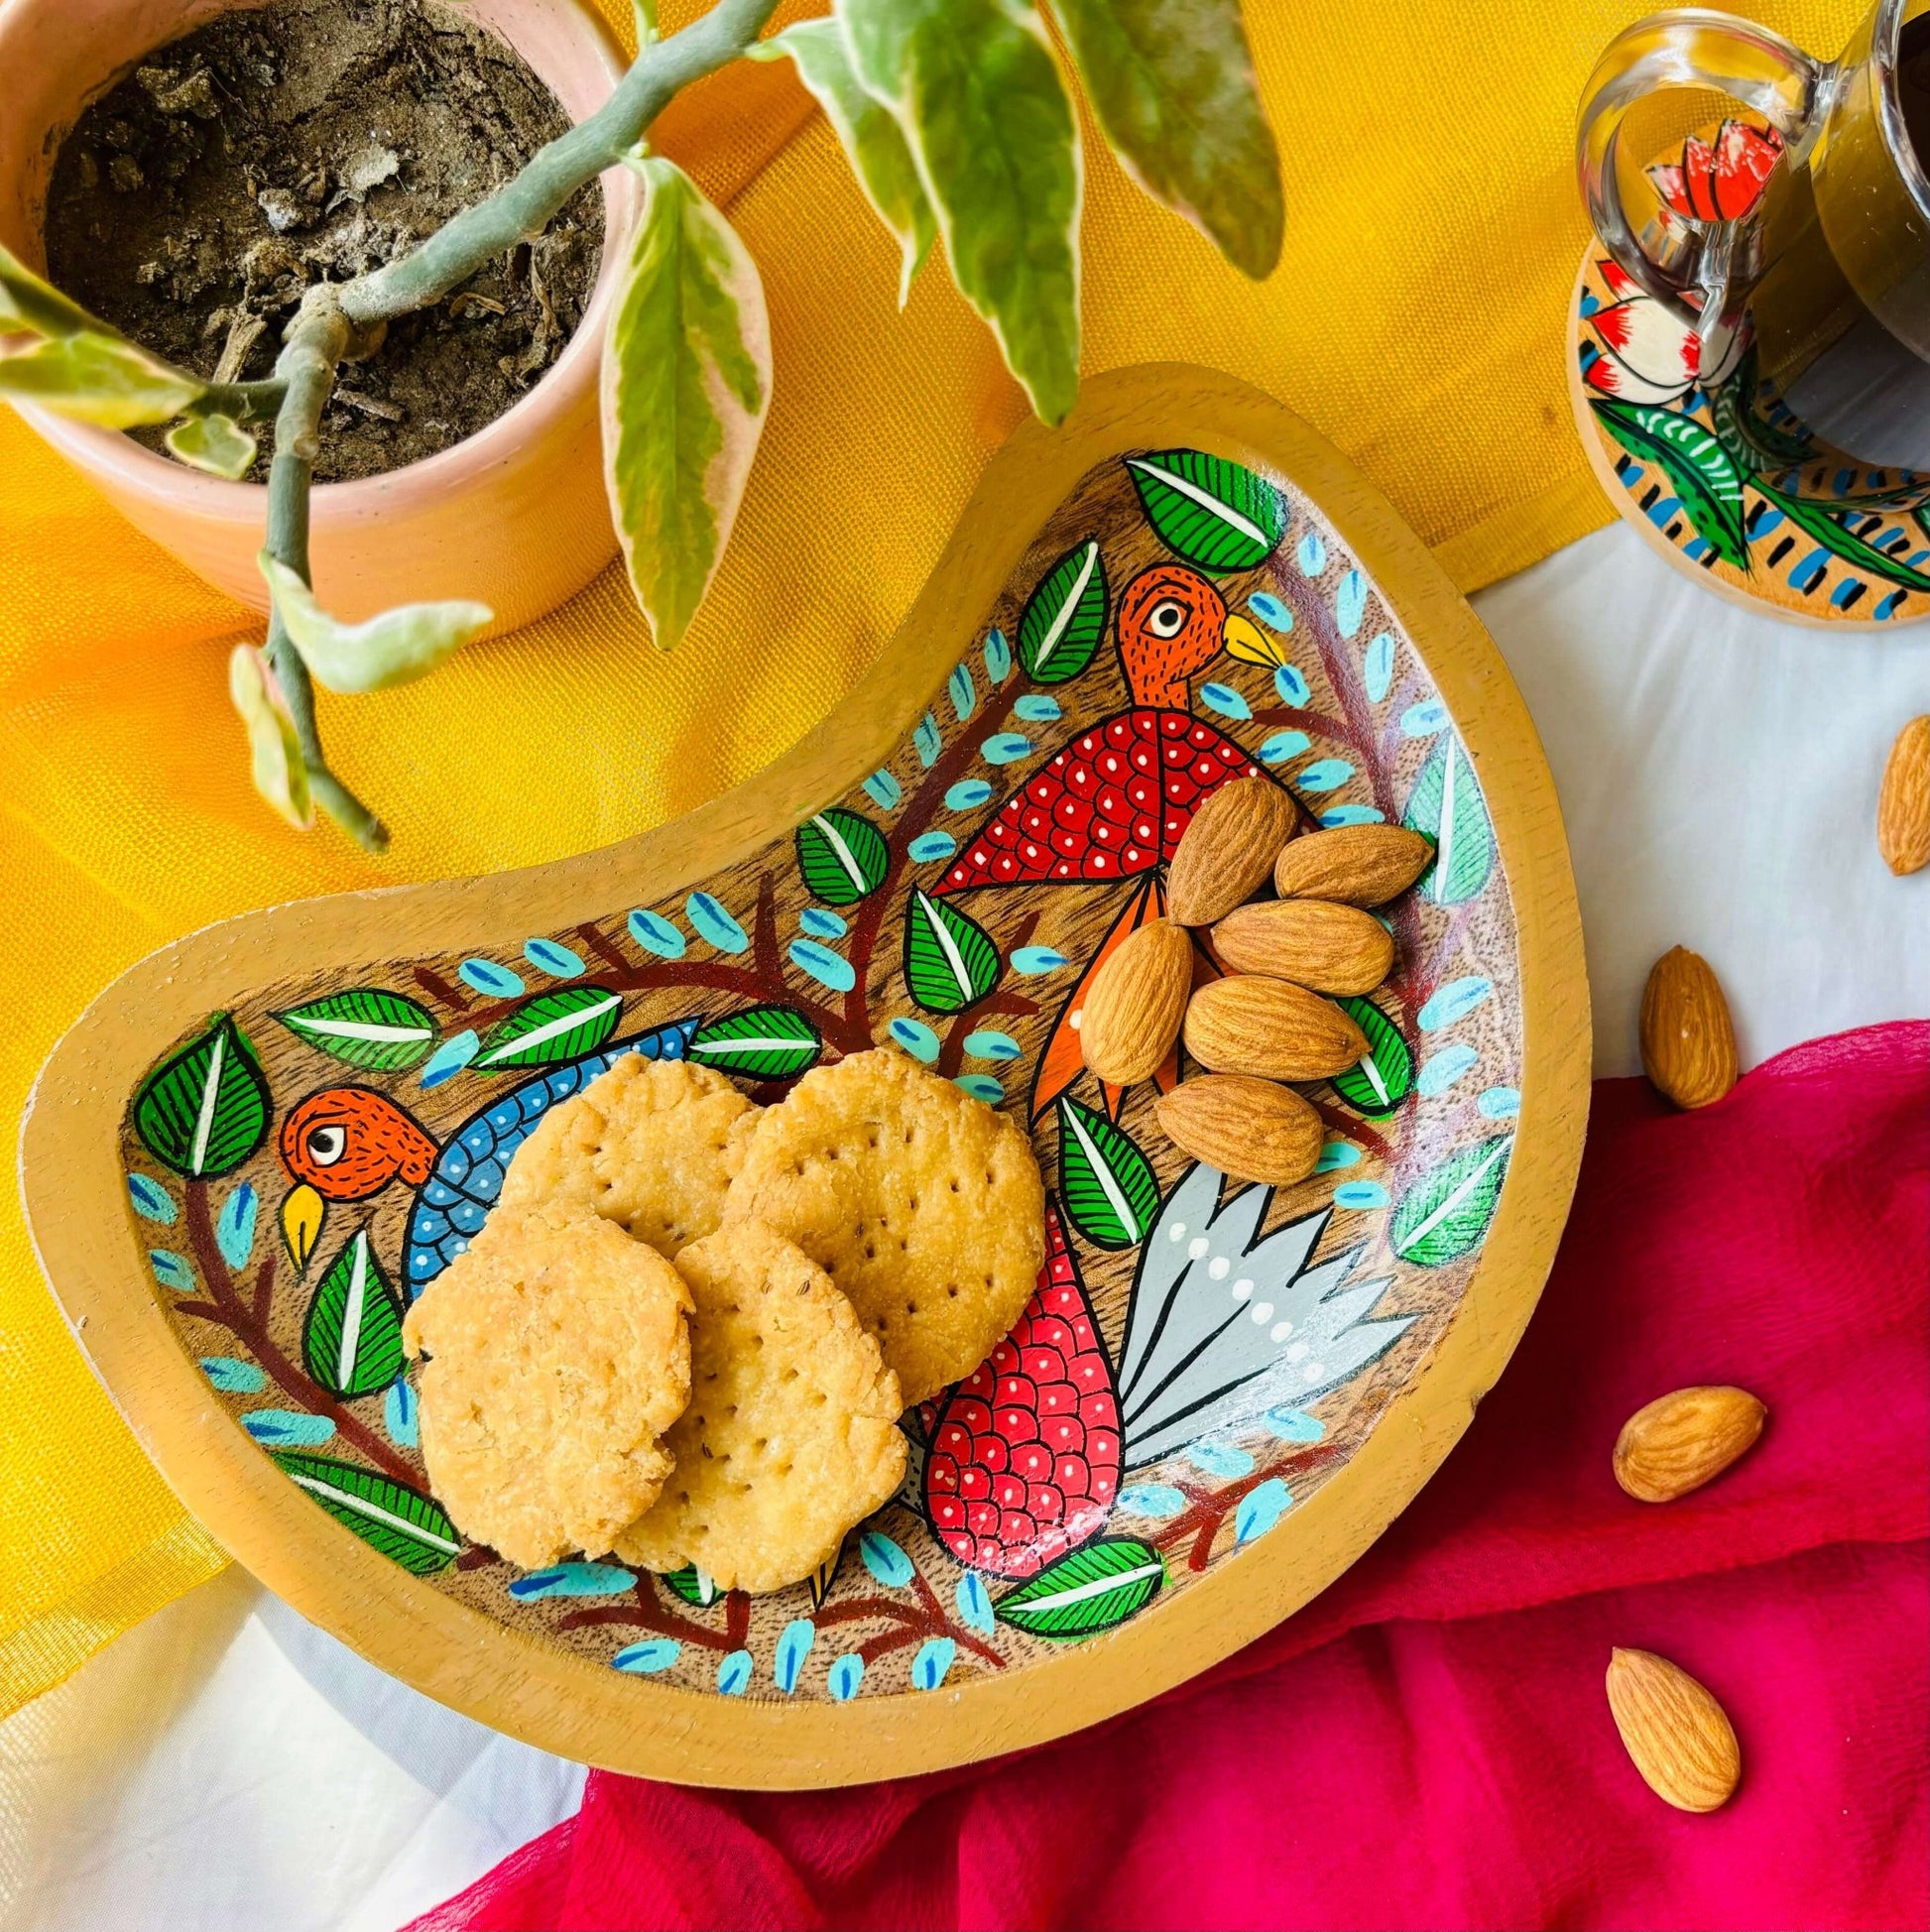 Biscuits and almonds are served in a handcrafted mango wood moon-shaped wooden tray for the kitchen or trinket tray, painted with three bird motifs by generational Pattachitra artists